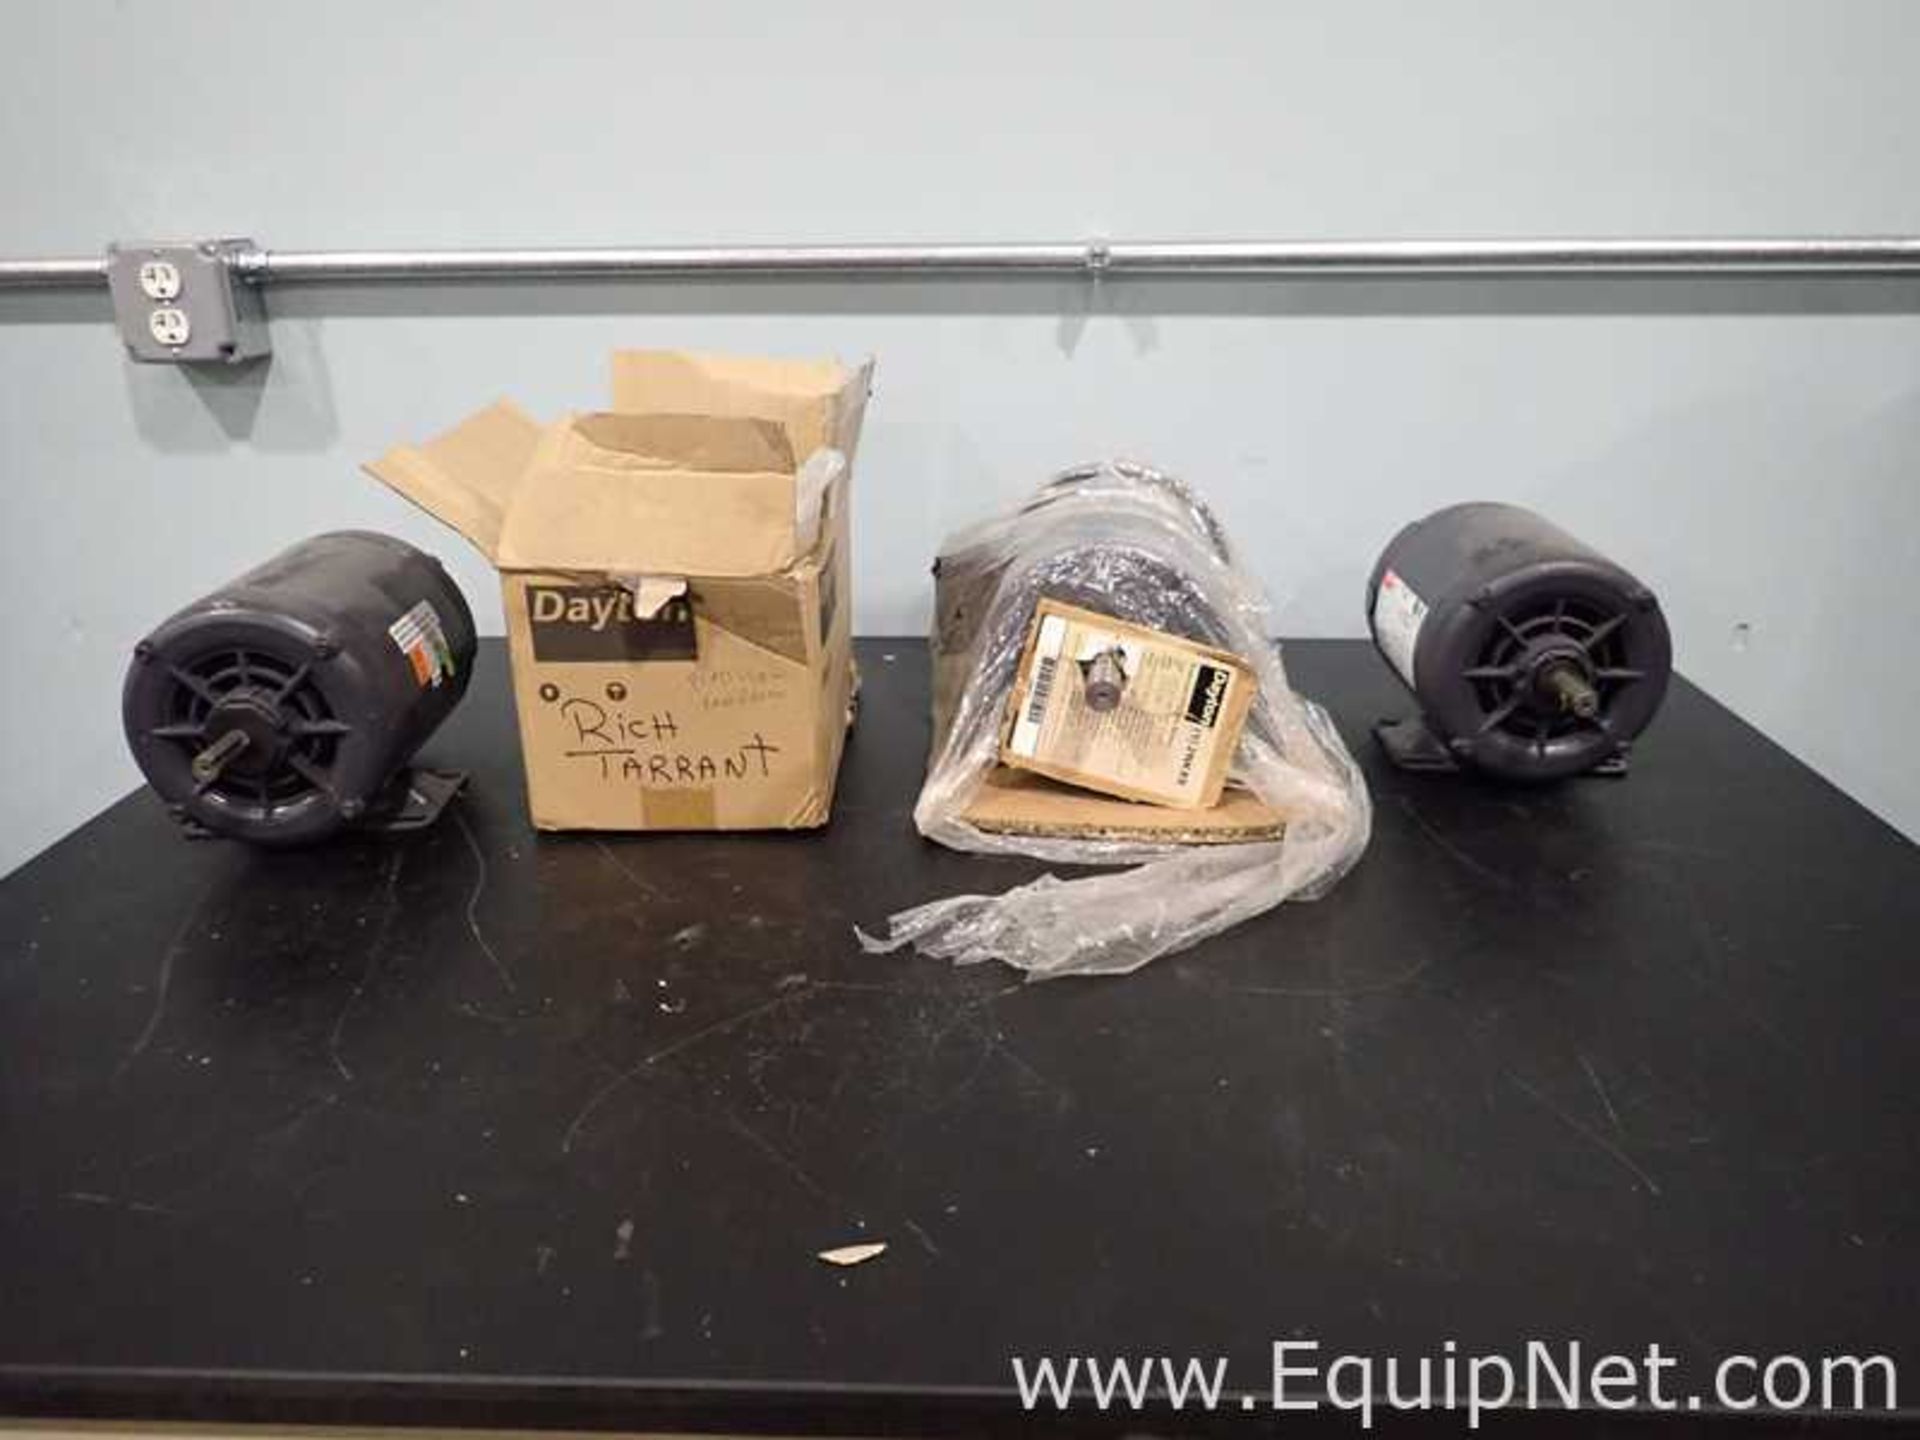 EQUIPNET LISTING #793361; REMOVAL COST: $25; DESCRIPTION: Unused Lot of 4 Various Dayton Electric